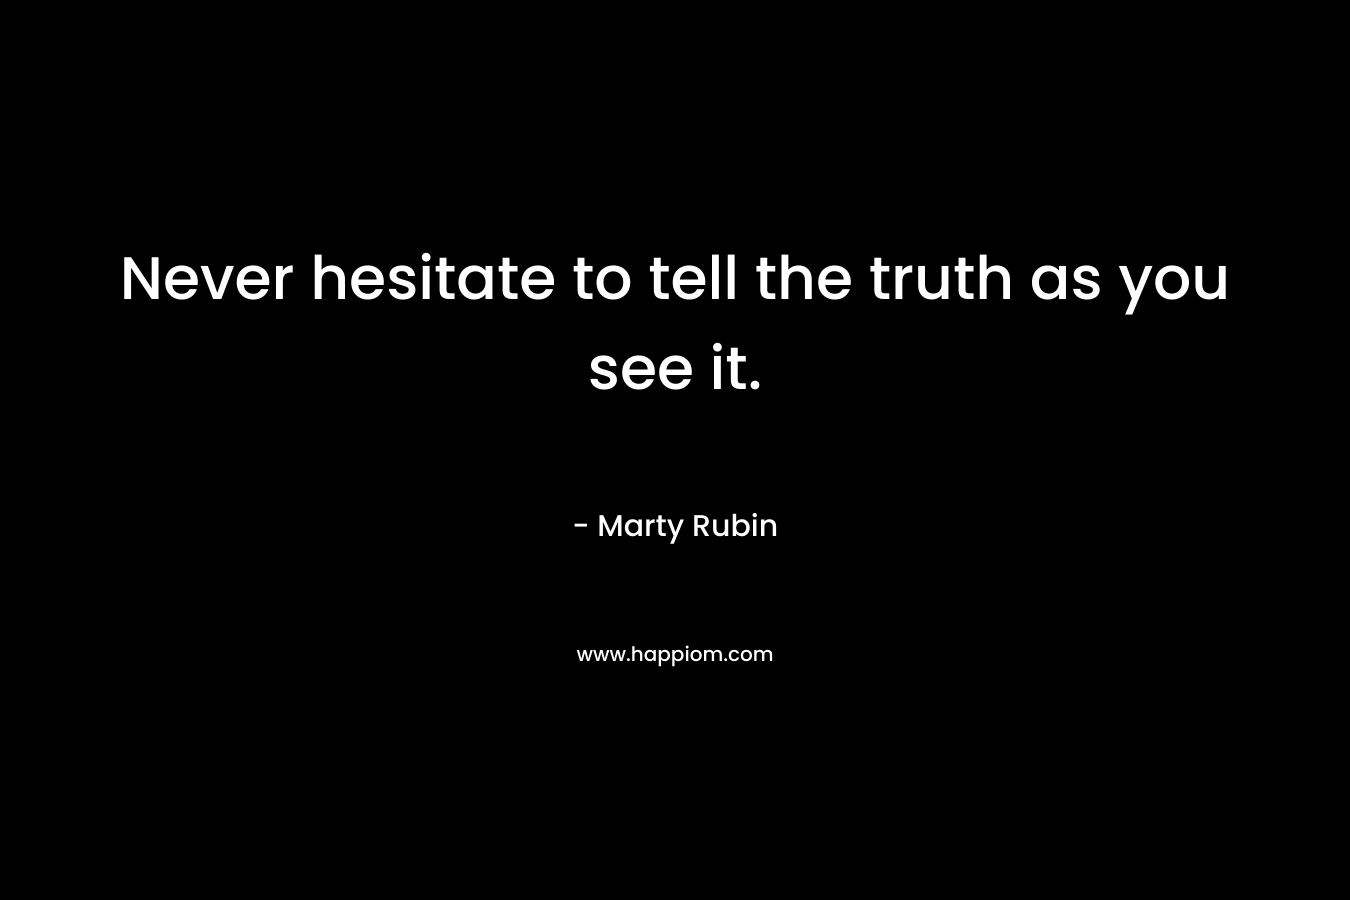 Never hesitate to tell the truth as you see it.